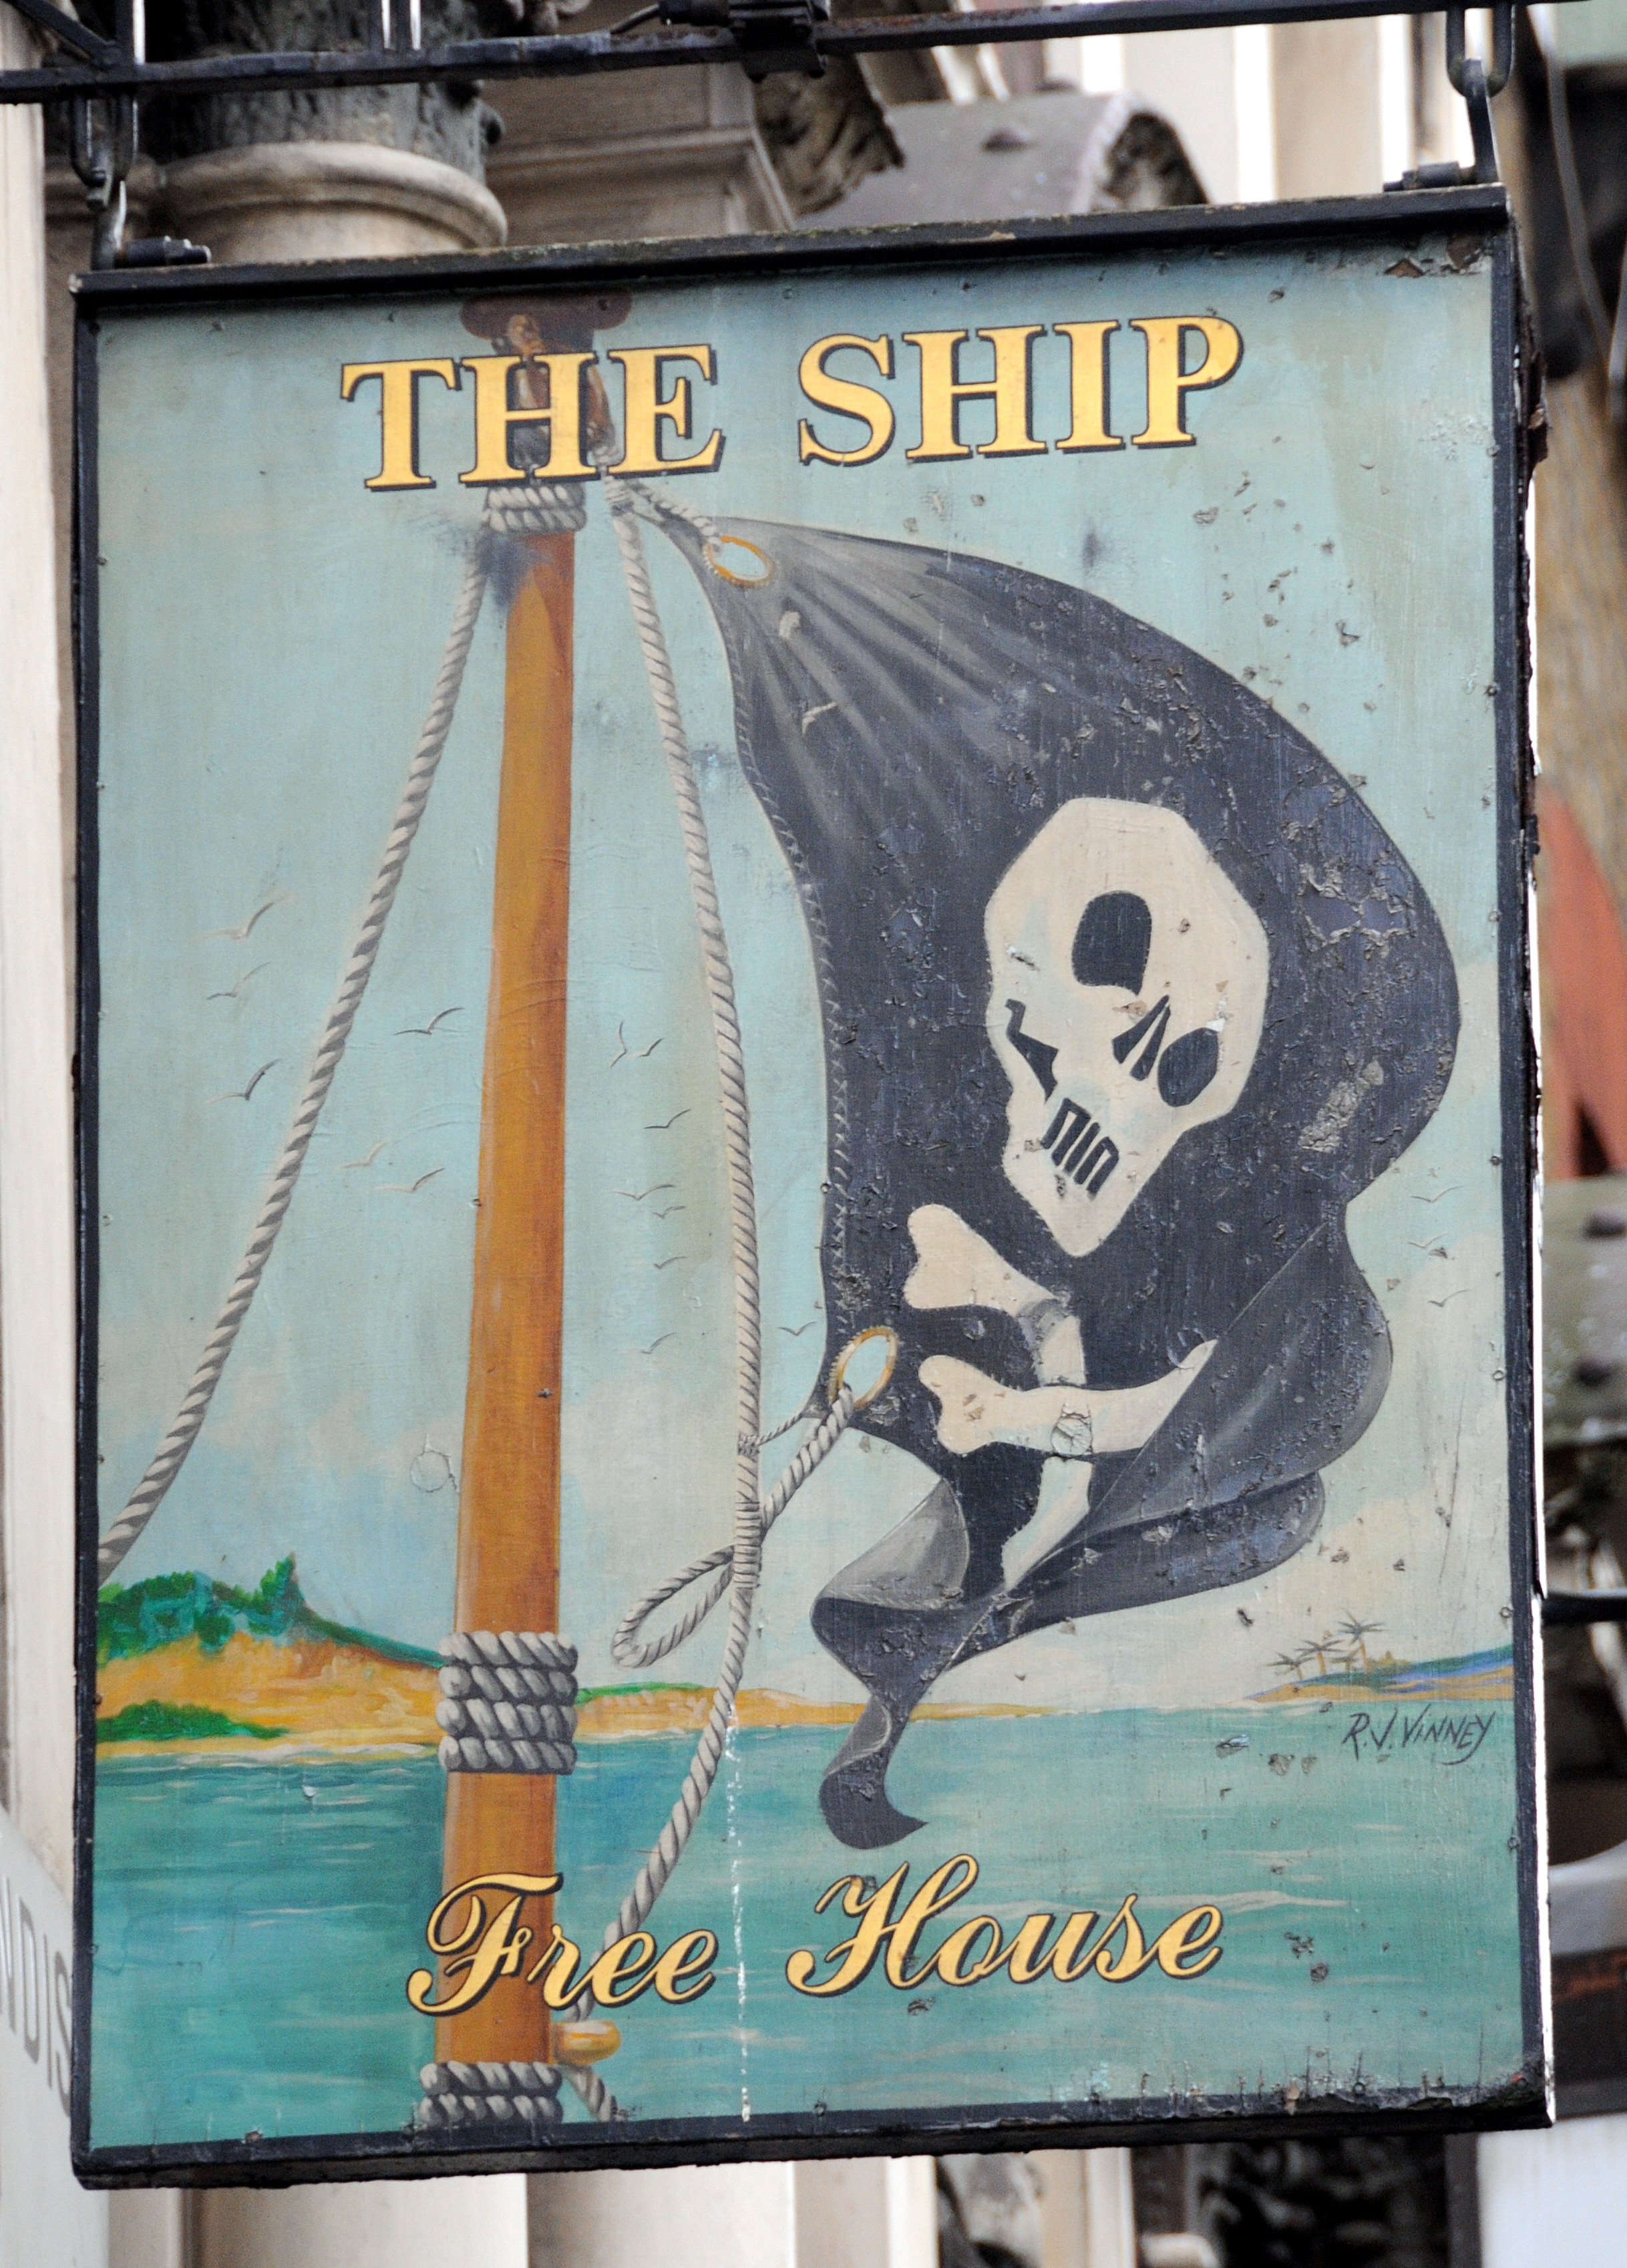 Pub sign showing skull and cross bones pirate flag.